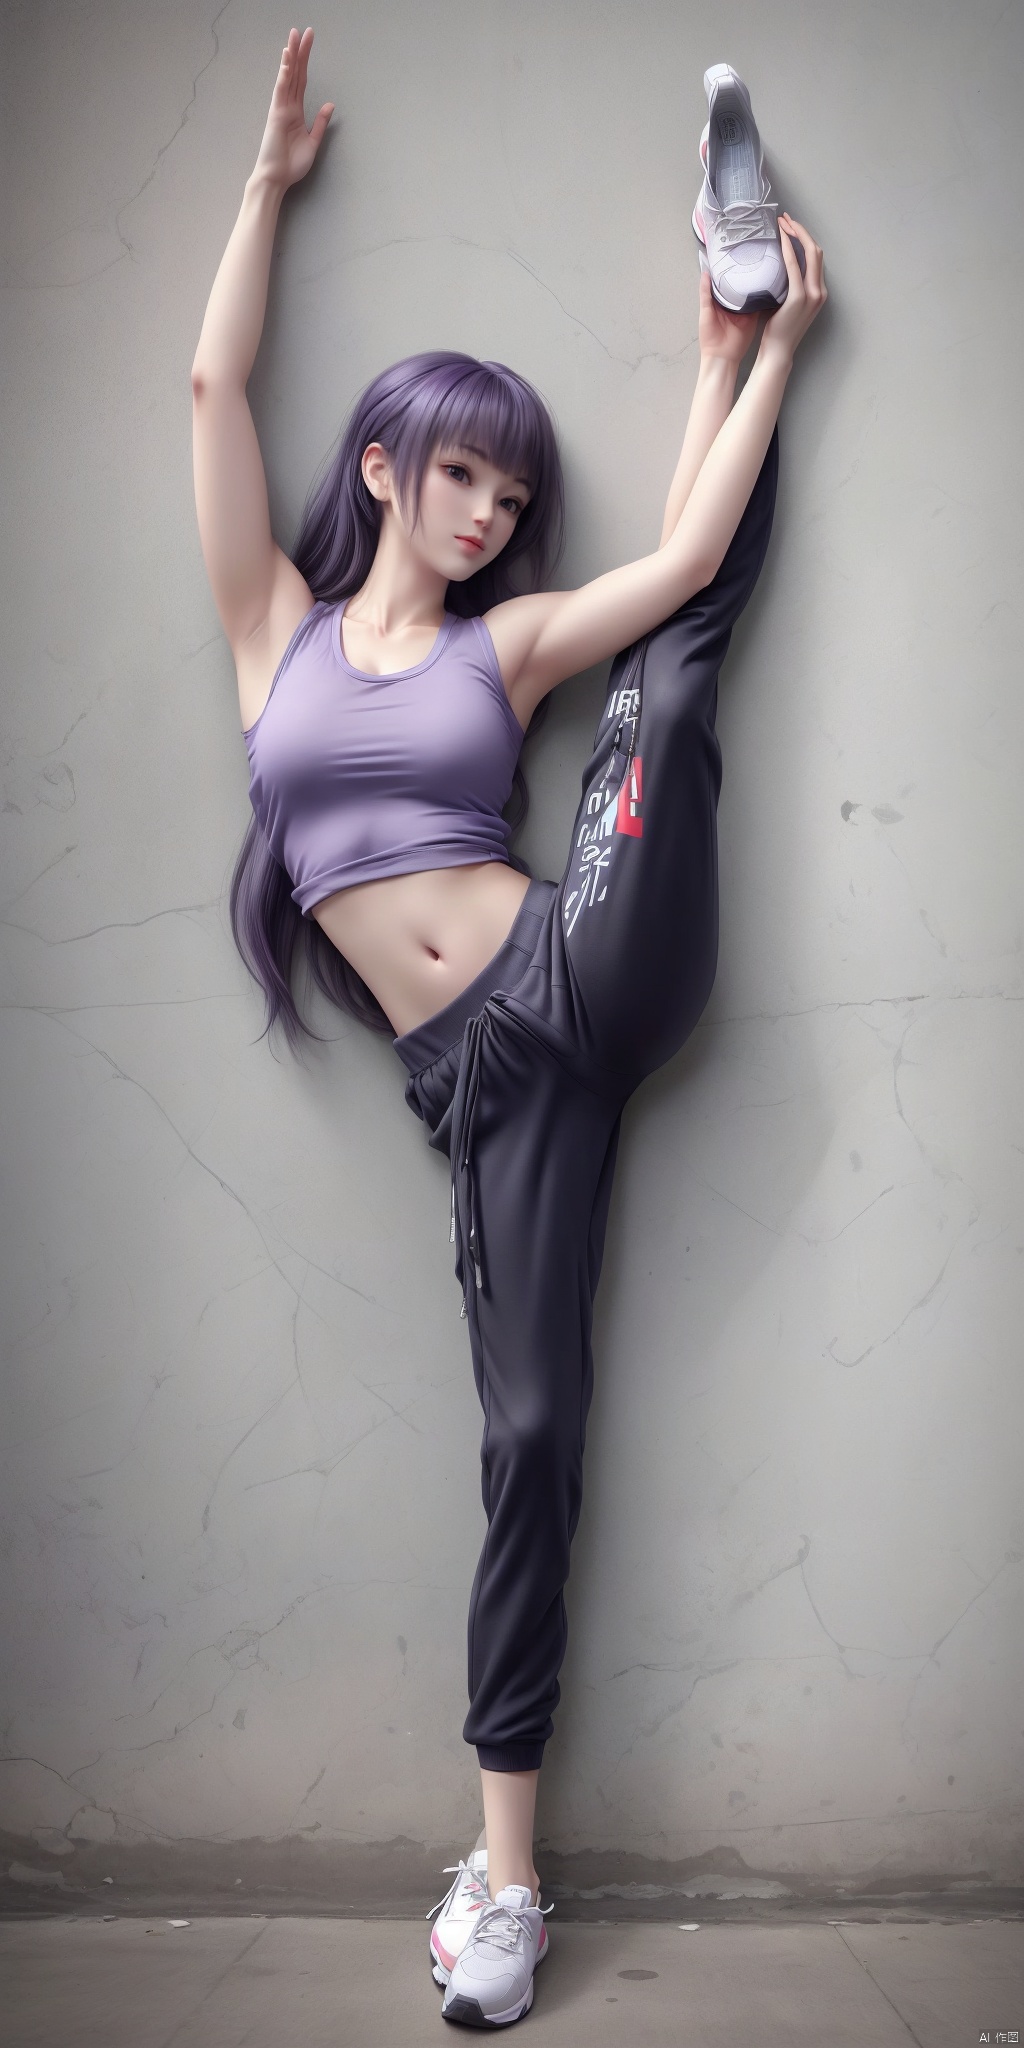 1 girl, (one person: 1.5), (purple hair: 1.2), (bangs: 1.2), (sleeveless top: 1.2), (sweatpants: 1.5), (sports shoes: 1.2), (whole body: 1.2), on the street, (taken from below)